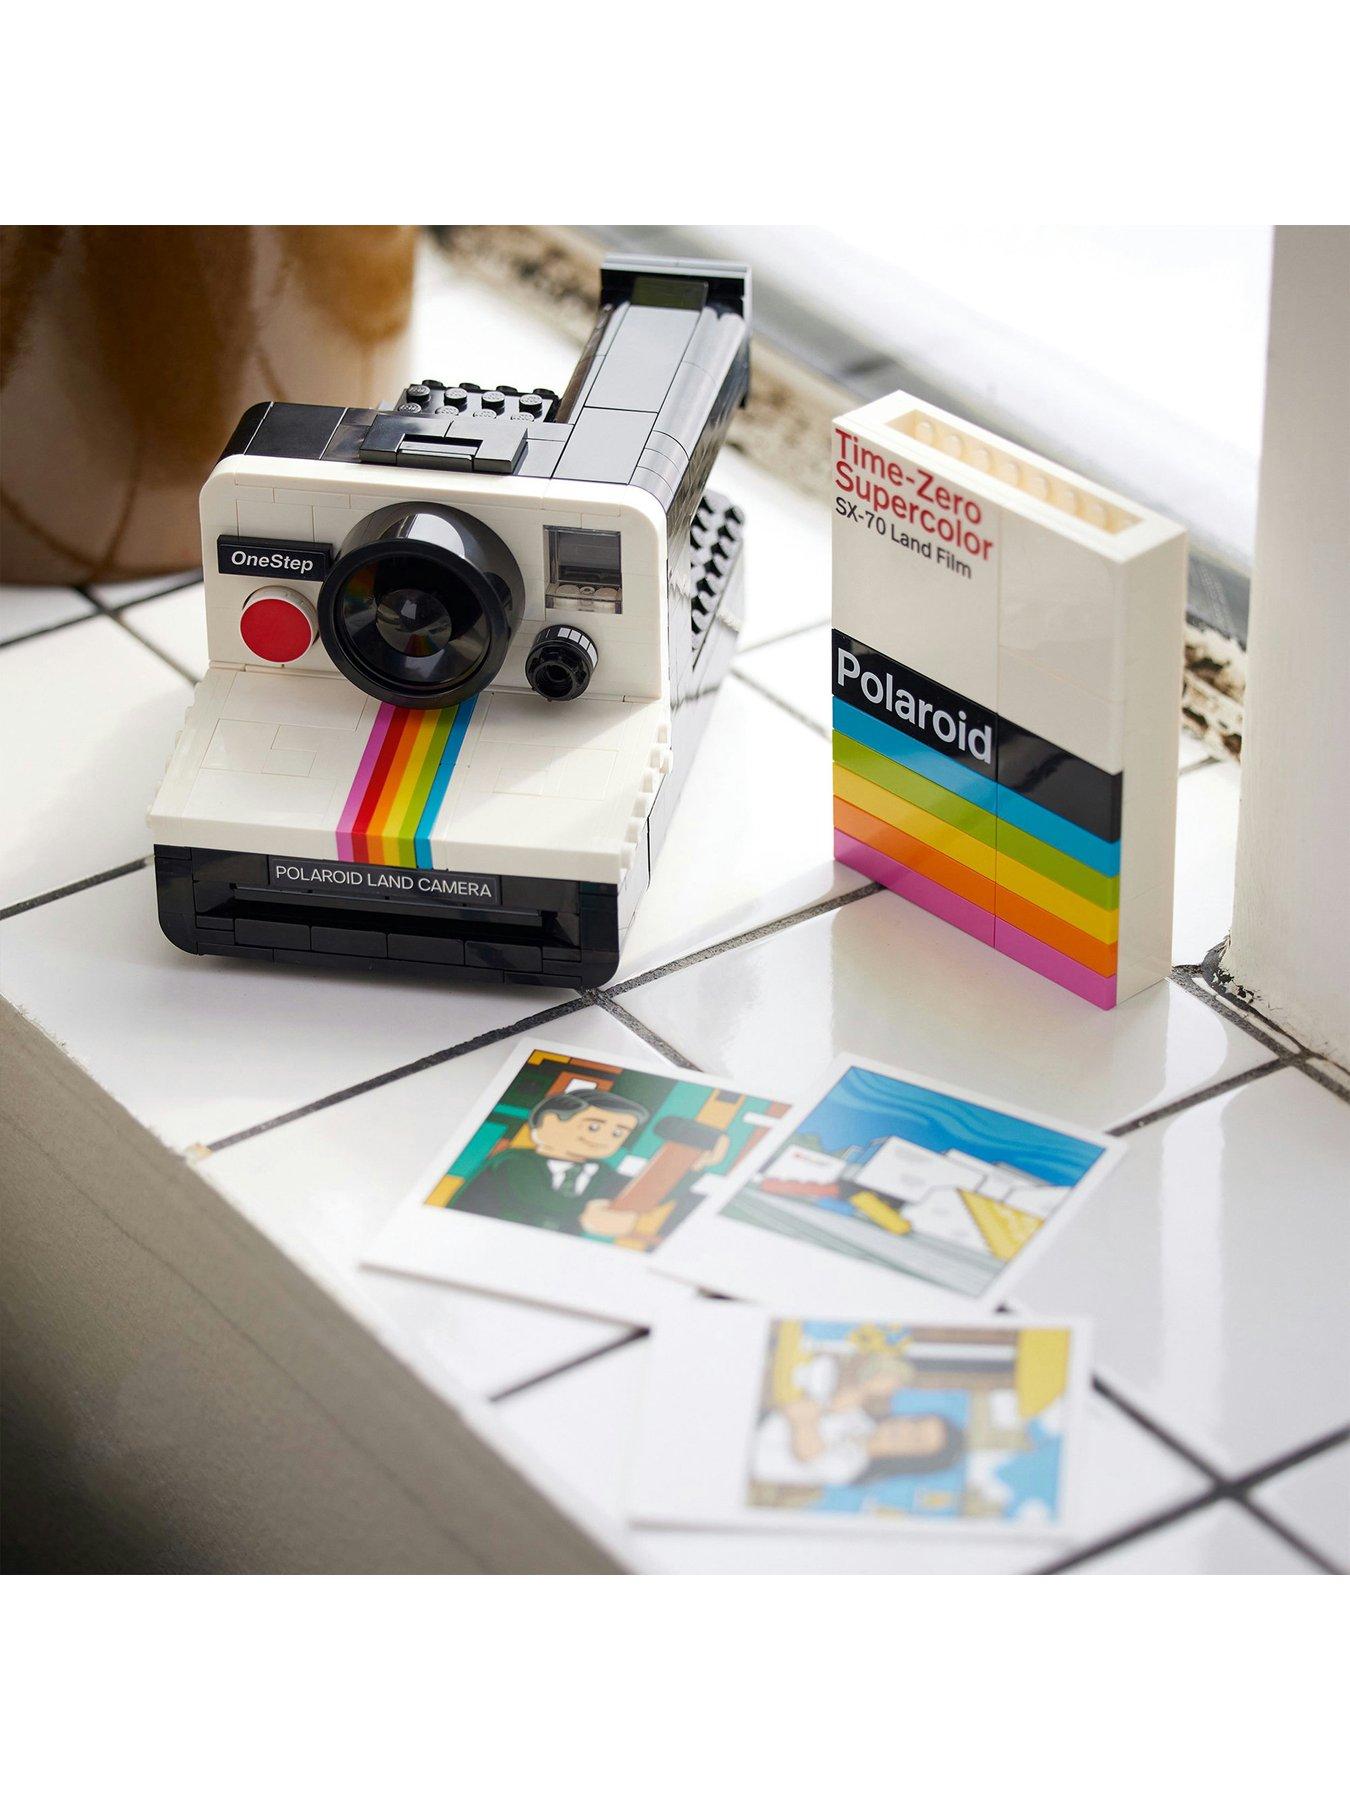 LEGO Ideas 21345 Polaroid OneStep SX-70 Camera to be Released on